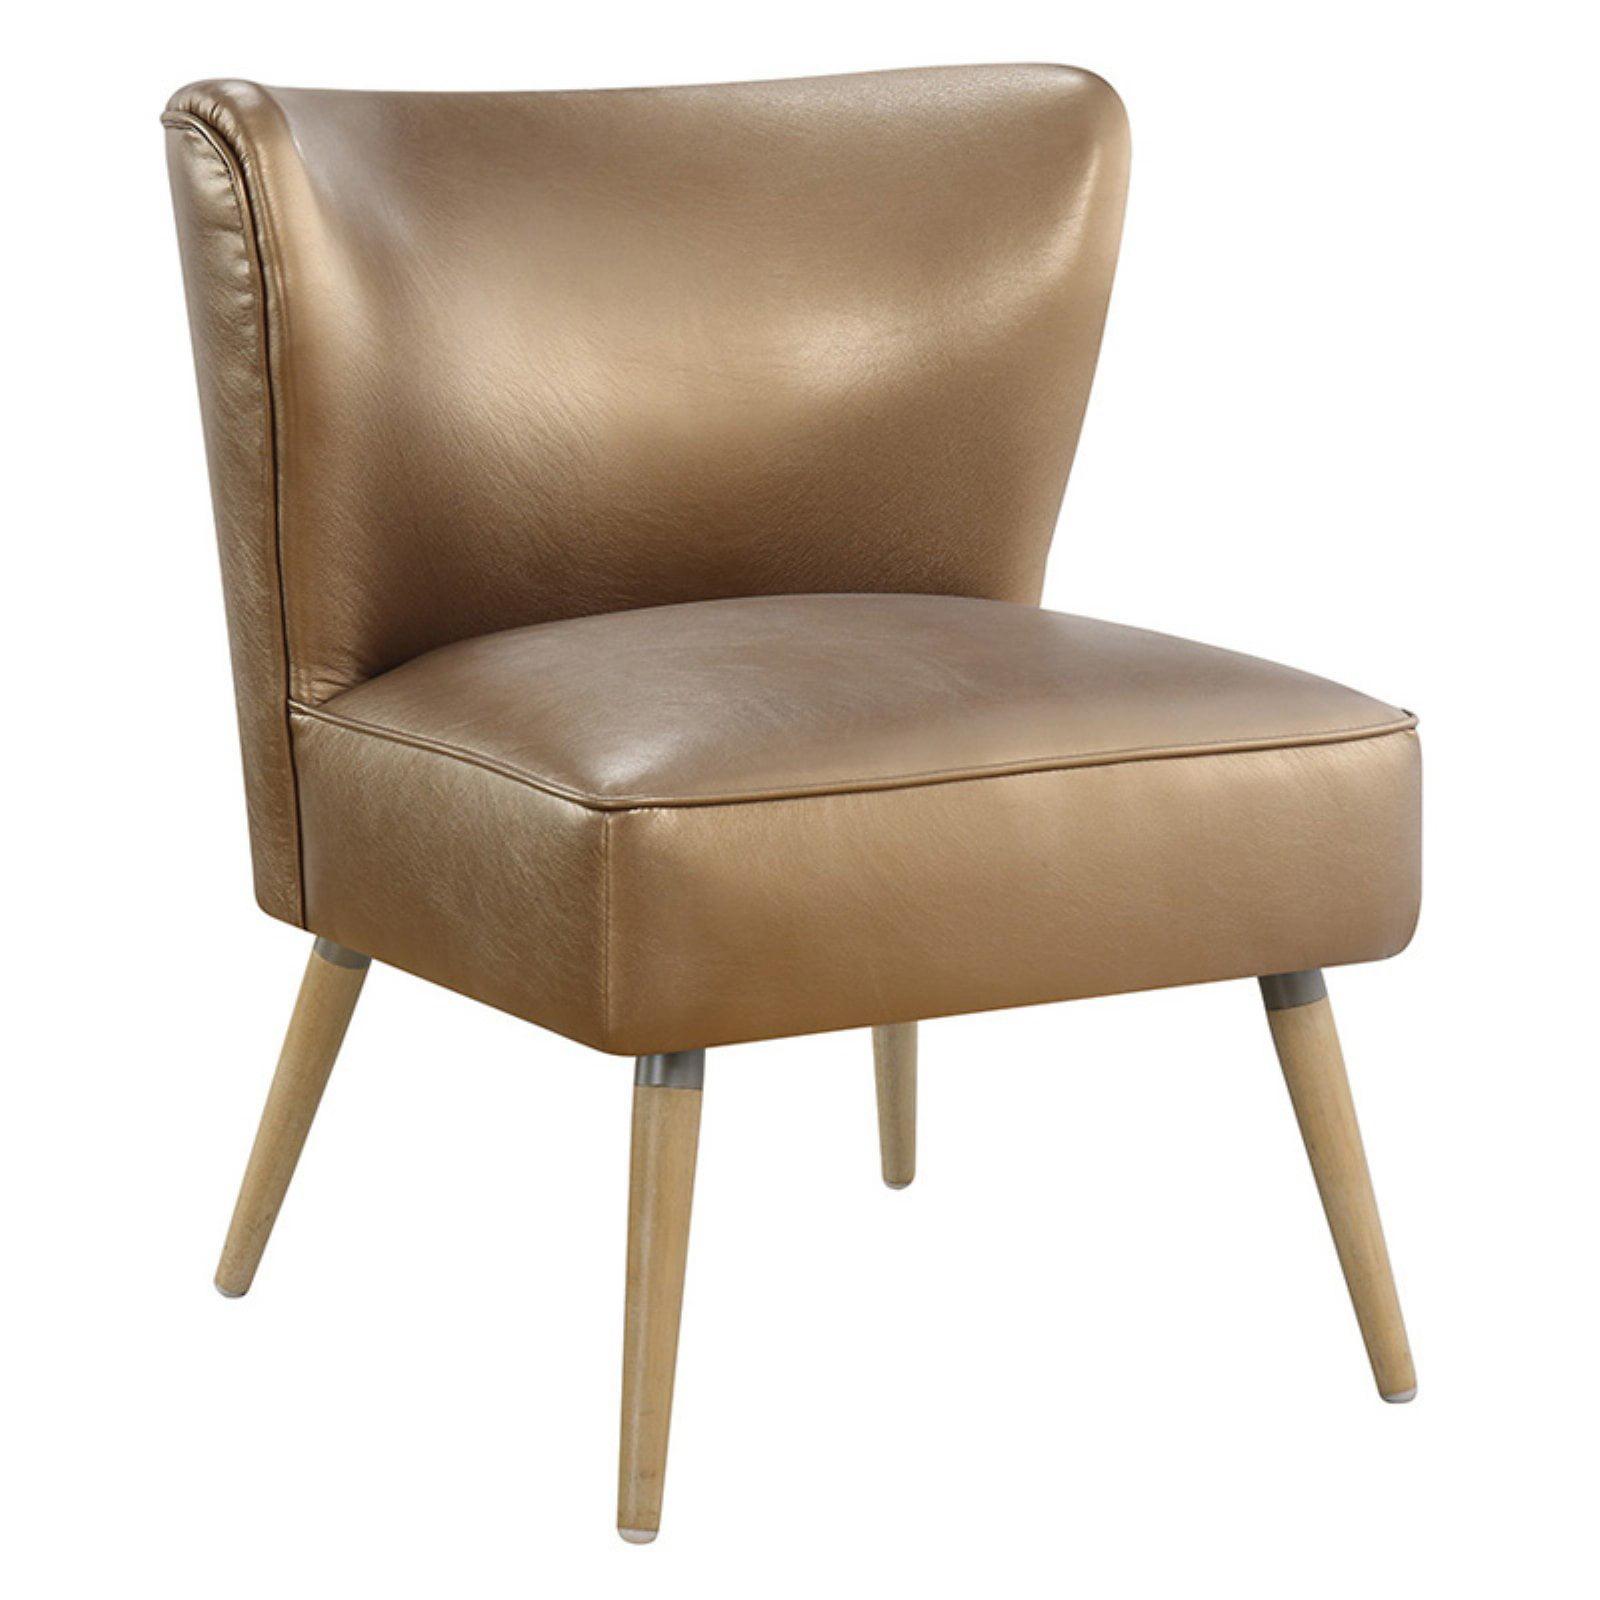 Mid-Century Modern Sizzle Copper Faux Leather Accent Chair